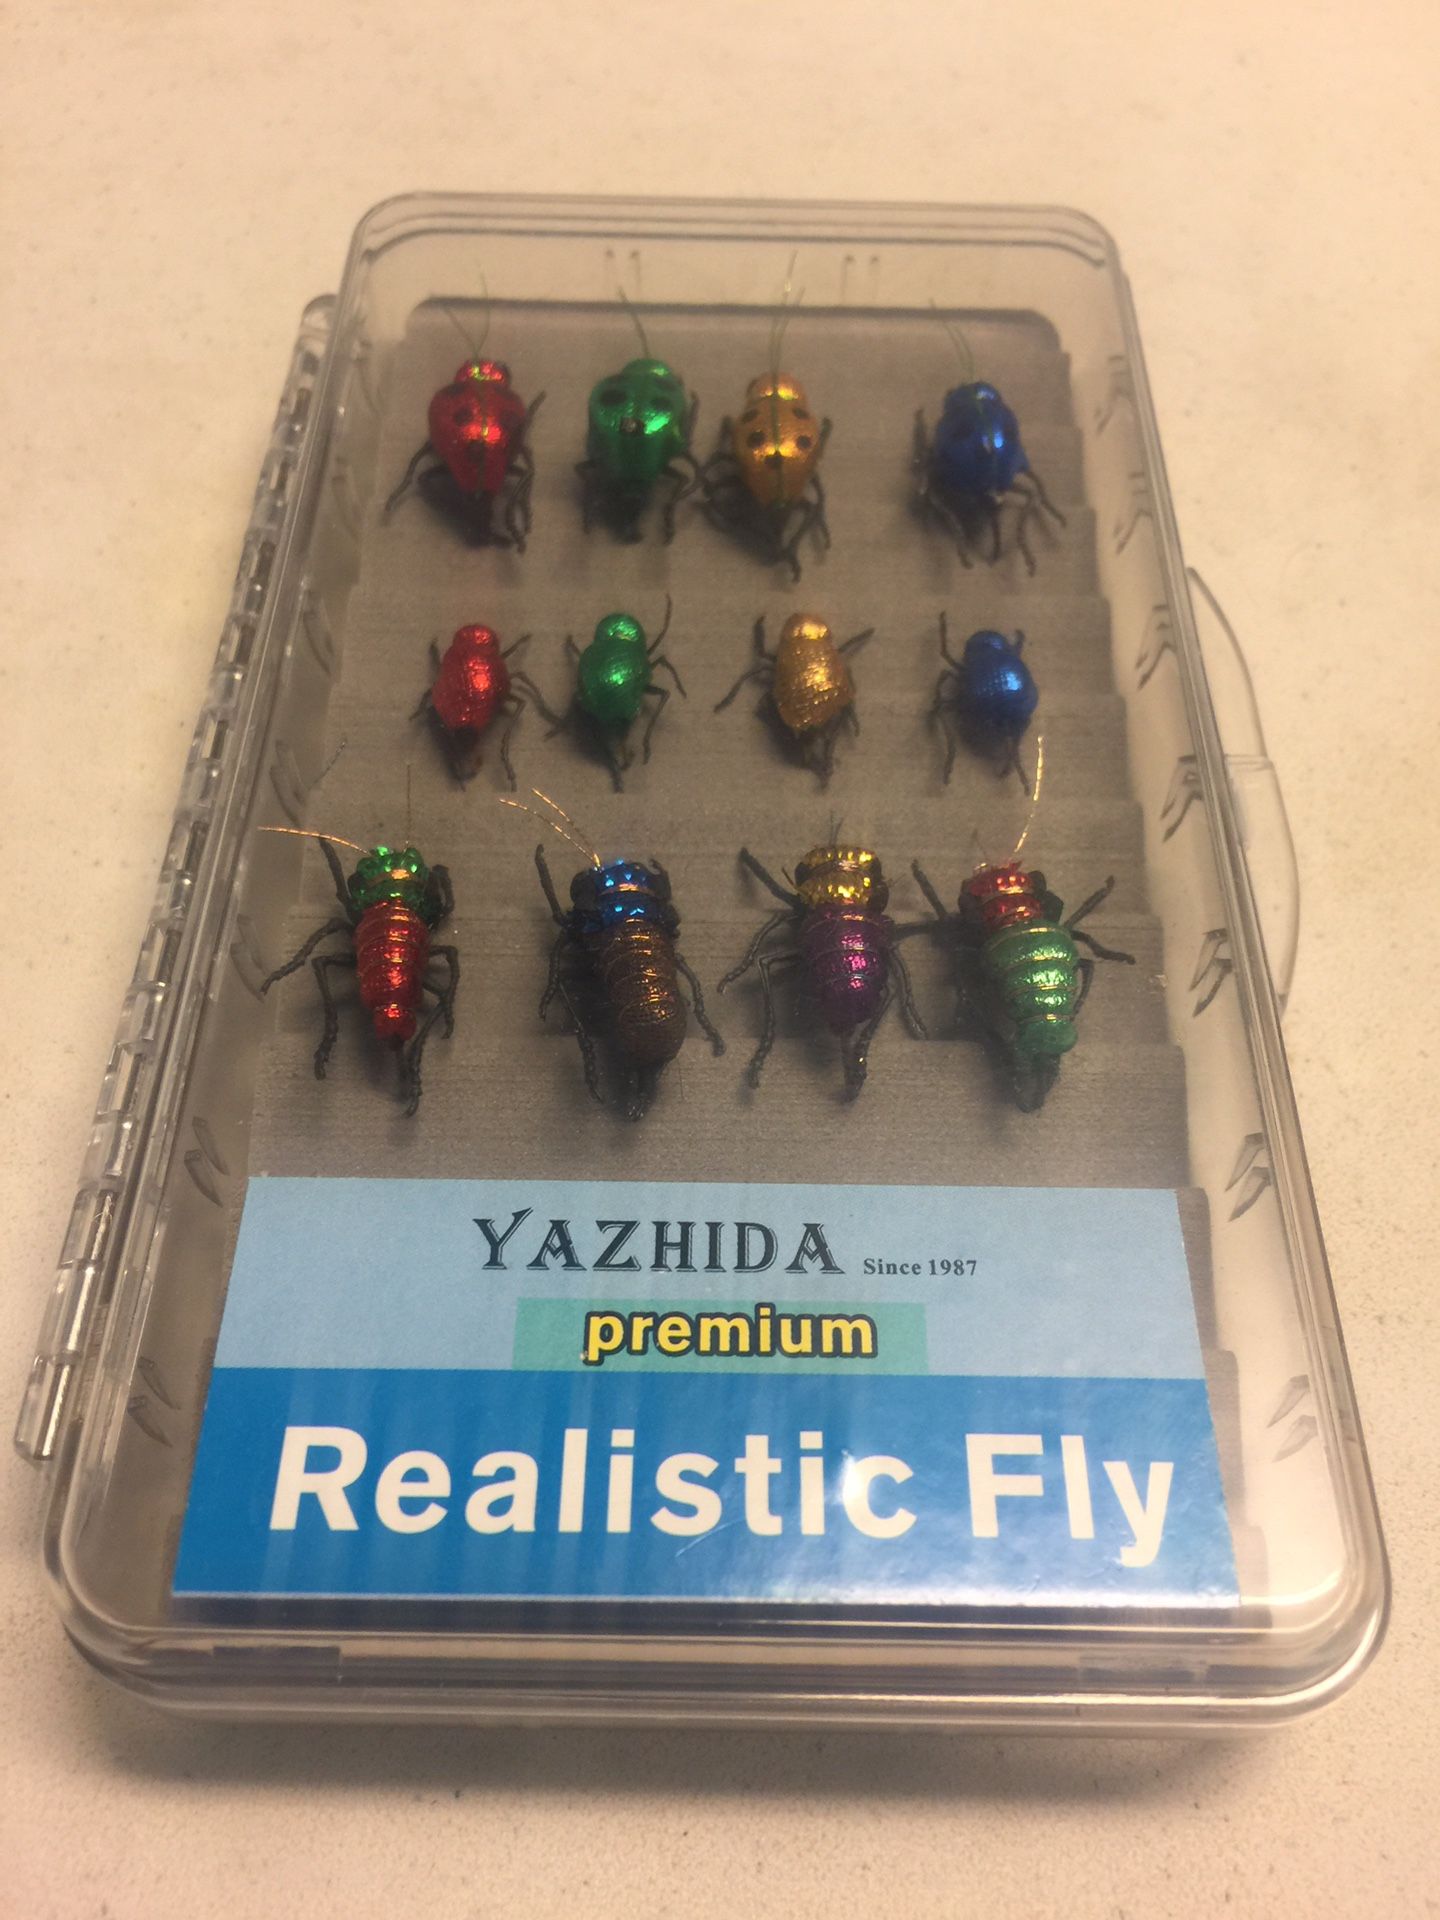 Fishing Hooks / Premium Realistic Fly / Yazhida / Fresh Water / For Trout 🎣